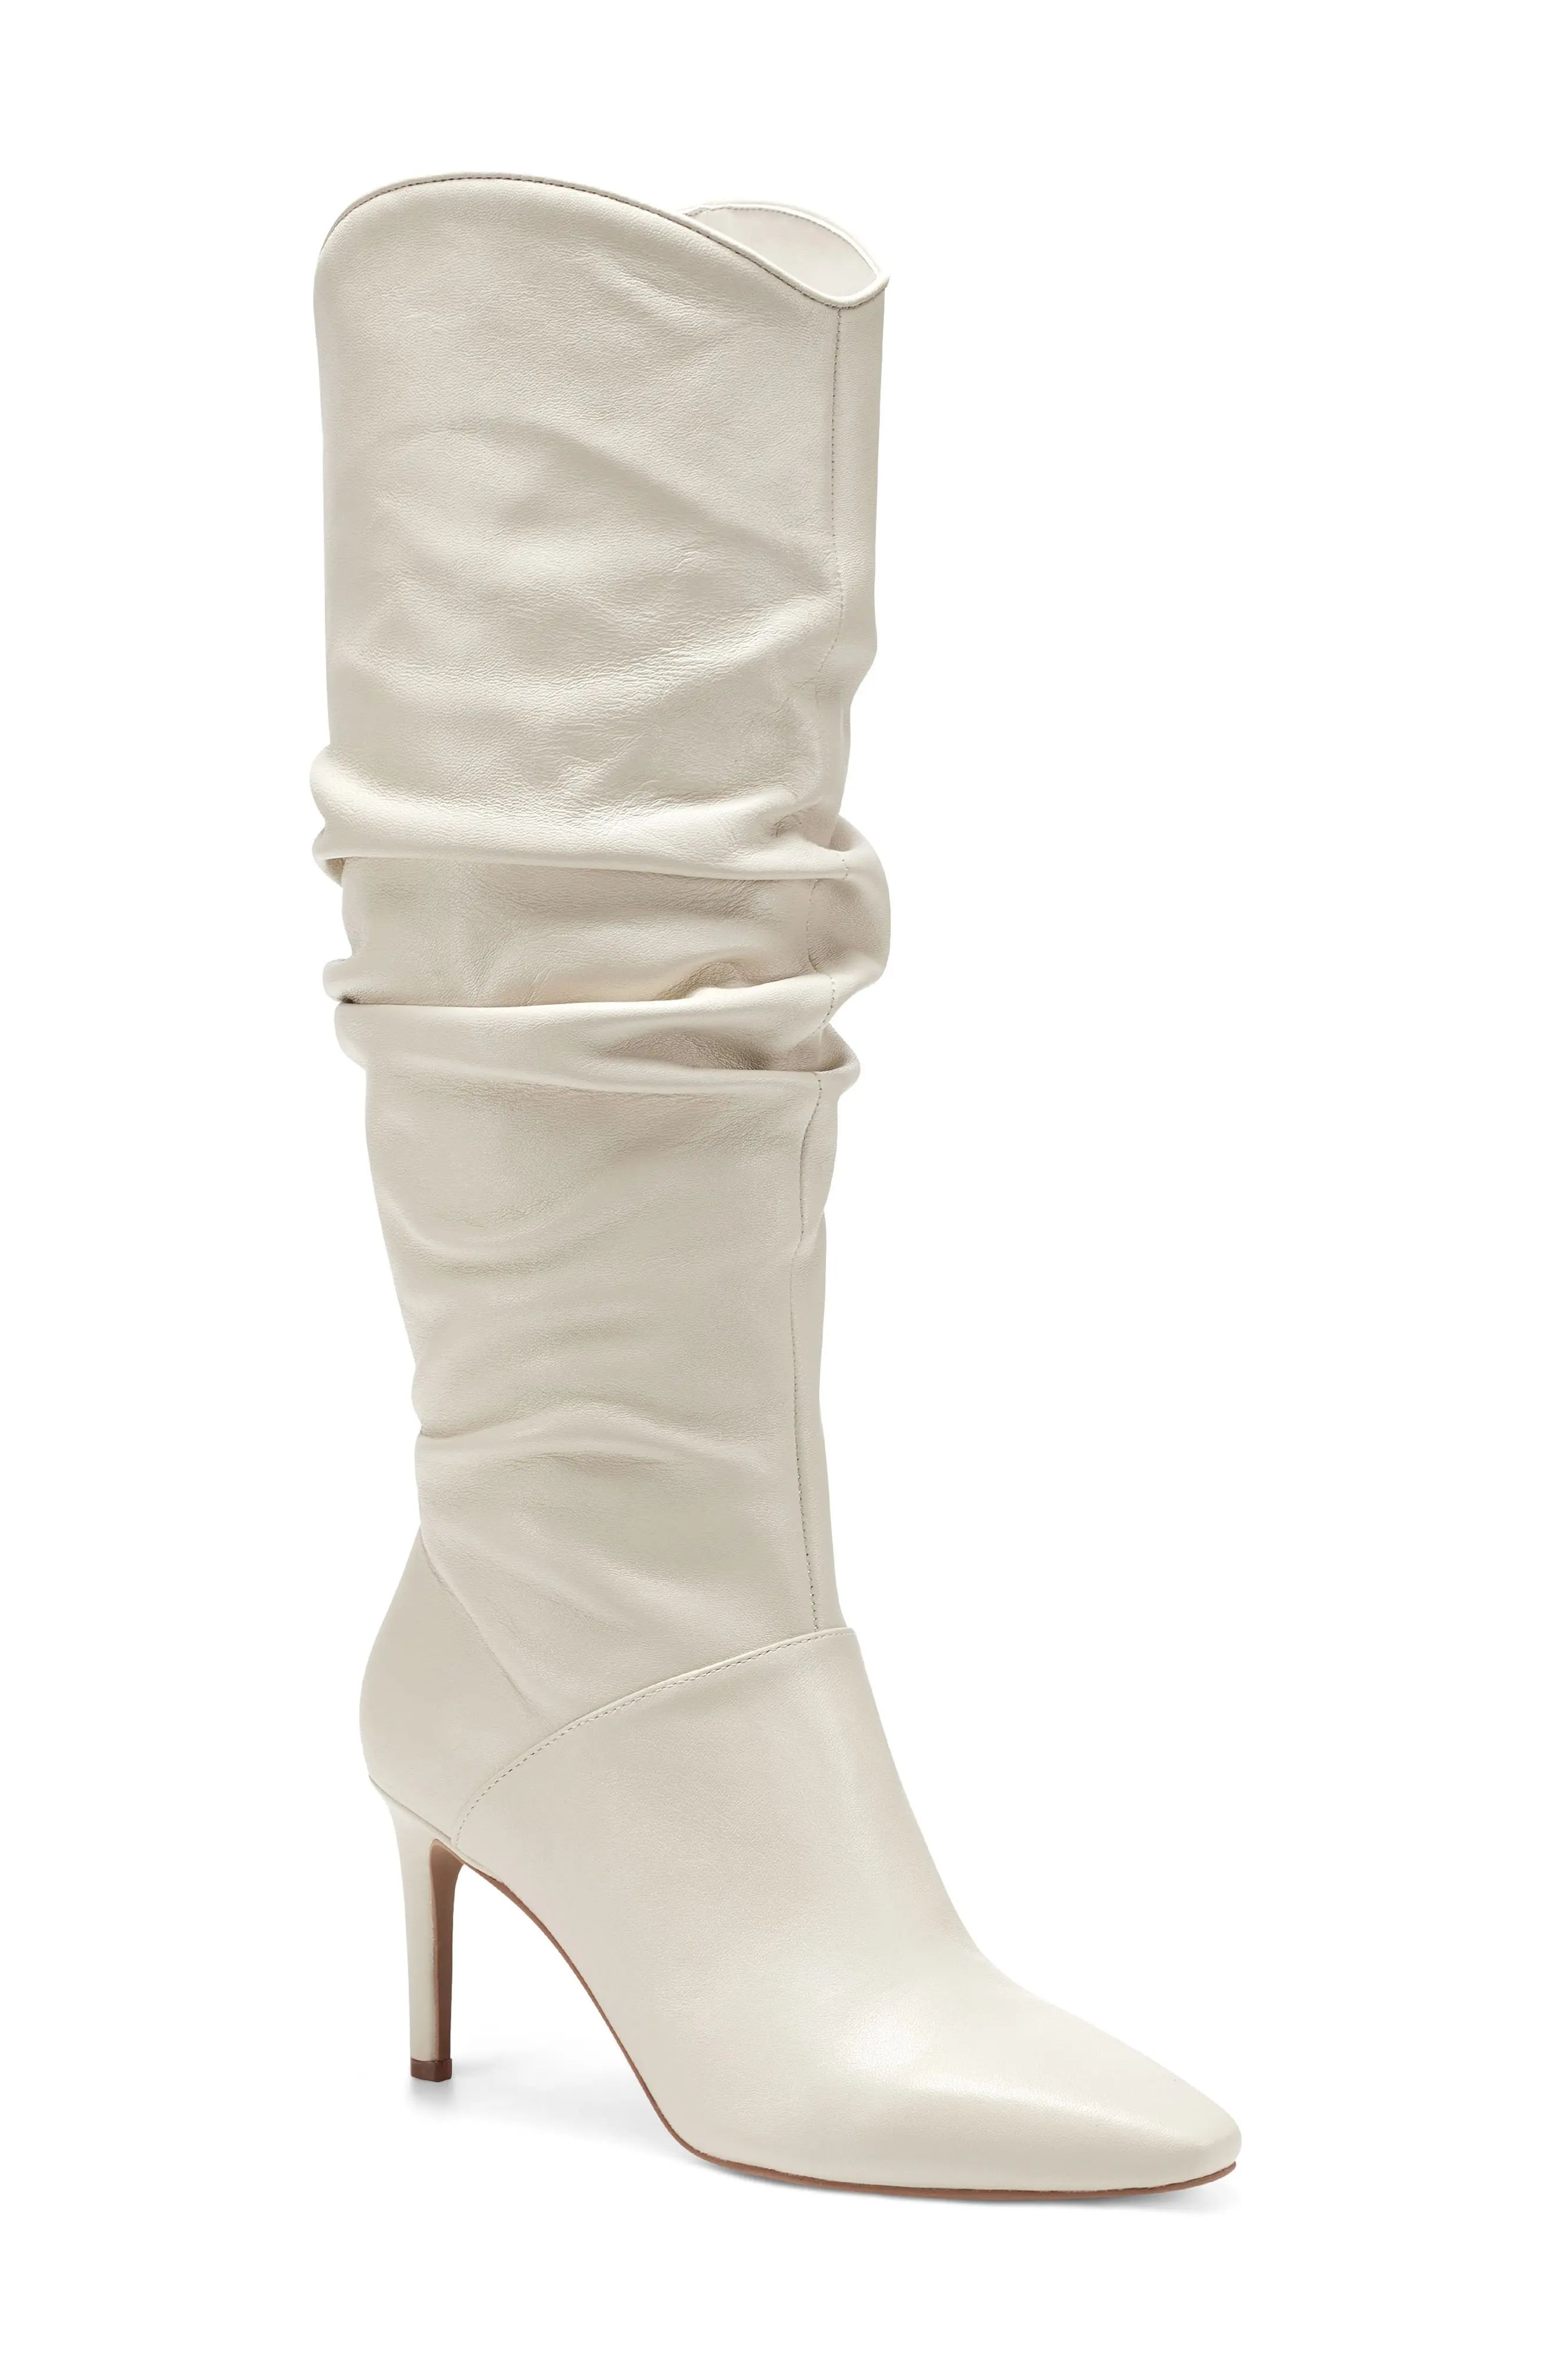 Vince Camuto Armonda Knee High Boot, Size 7 in White at Nordstrom | Nordstrom